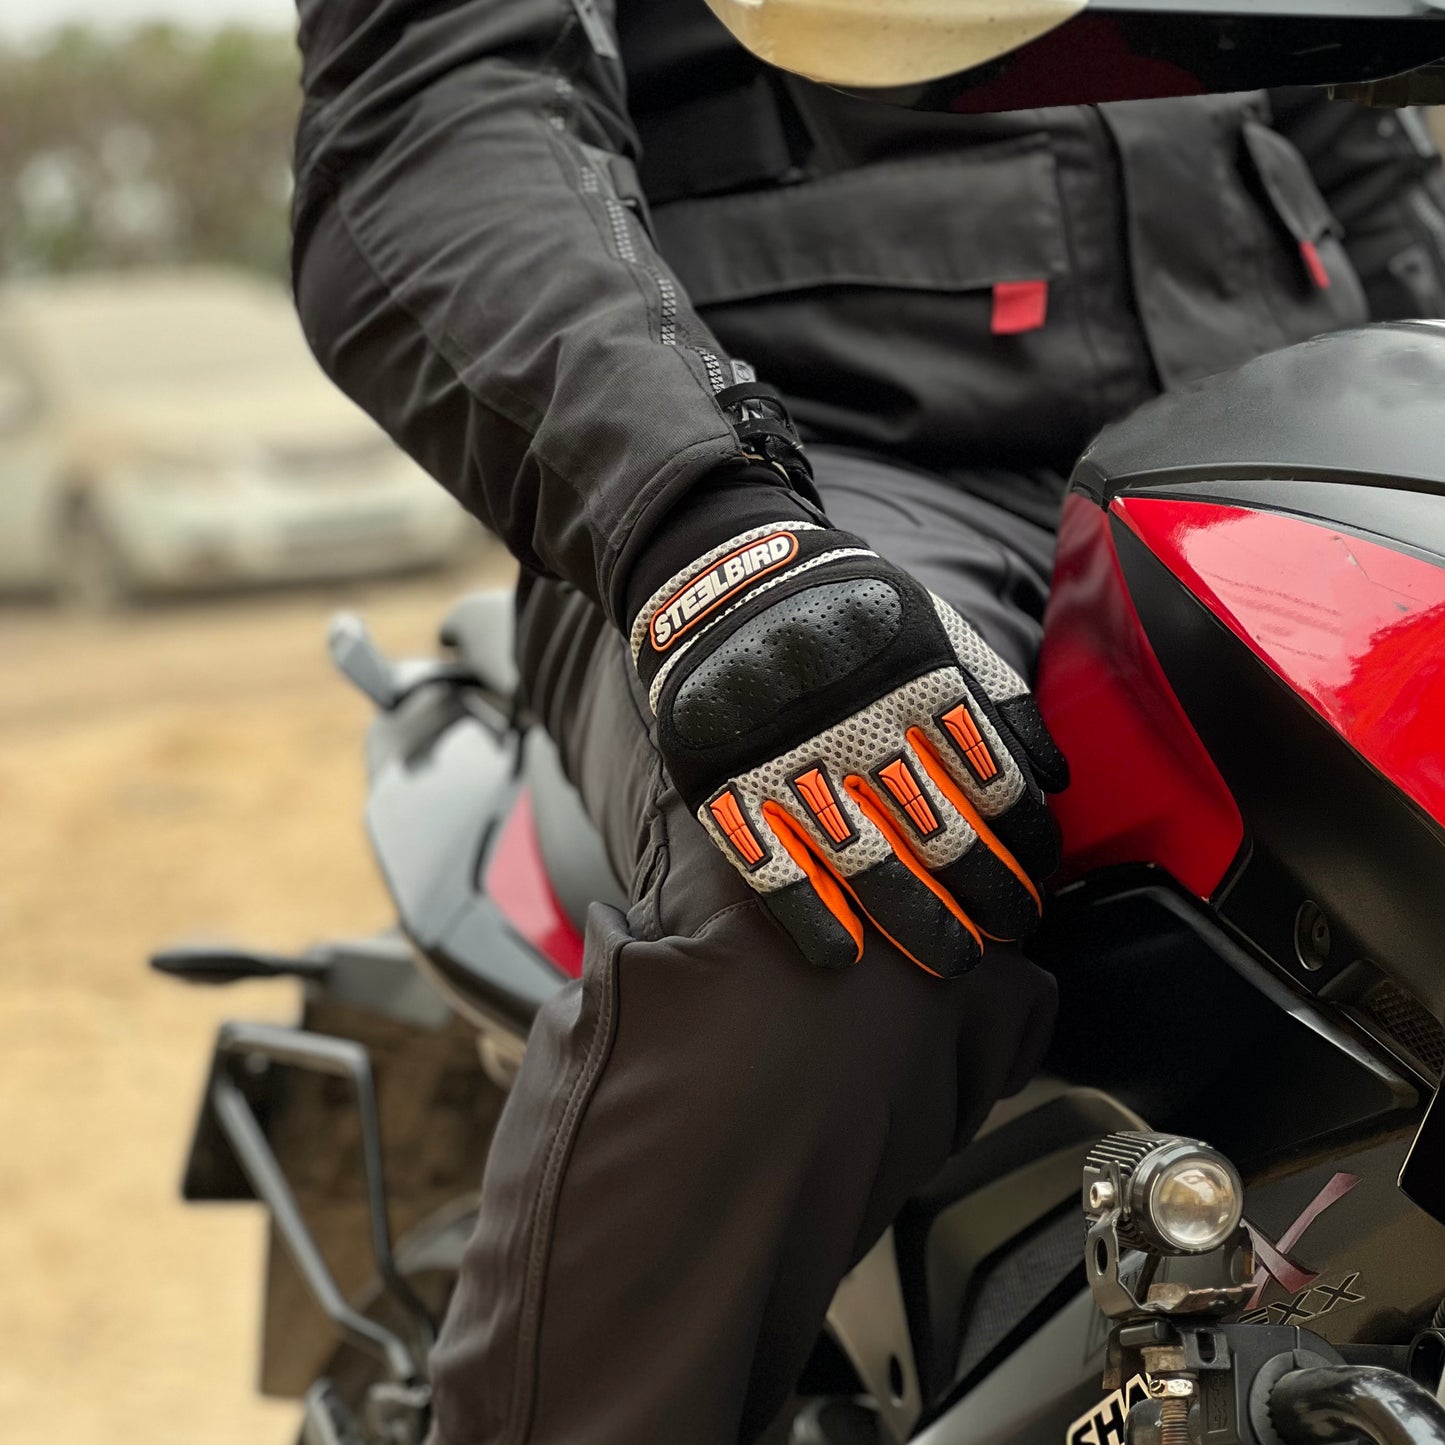 Steelbird Adventure A-1 Full Finger Riding Gloves with Touch Screen Sensitivity at Thumb and Index Finger, Protective Off-Road Motorbike Racing (Orange)